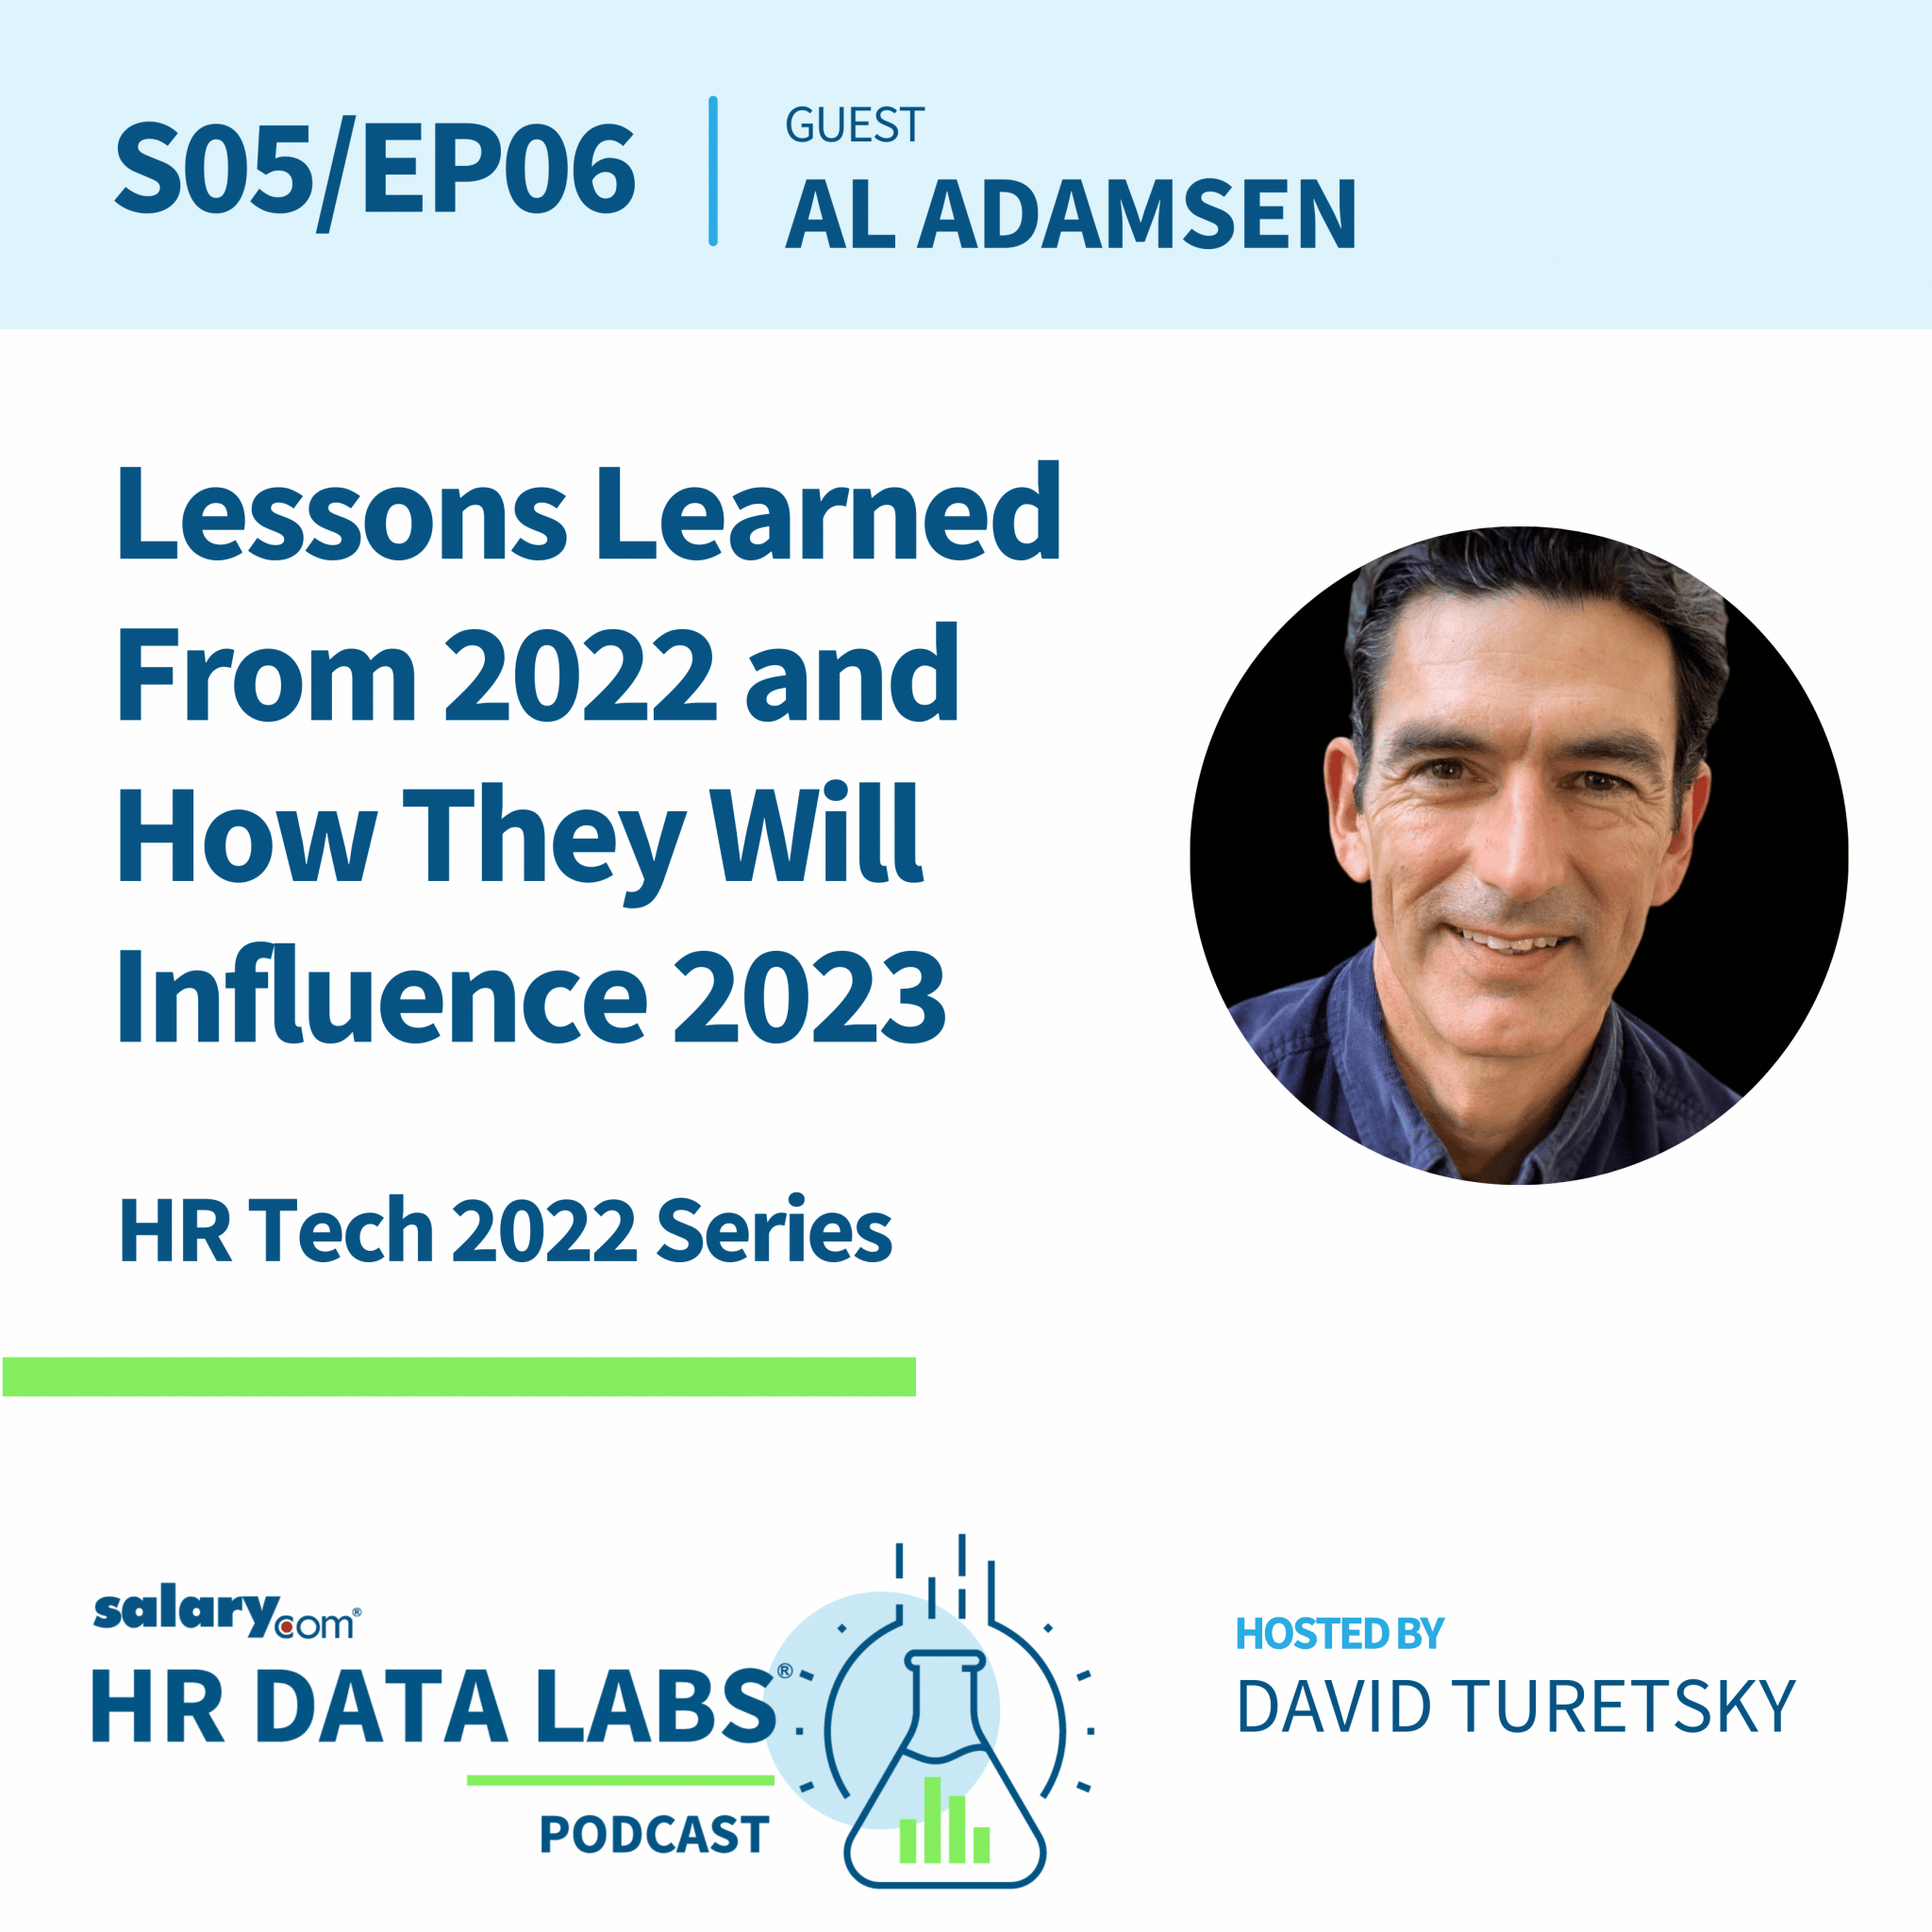 Al Adamsen – HR Tech 2022 Series – Lessons Learned From 2022 and How They Will Influence 2023